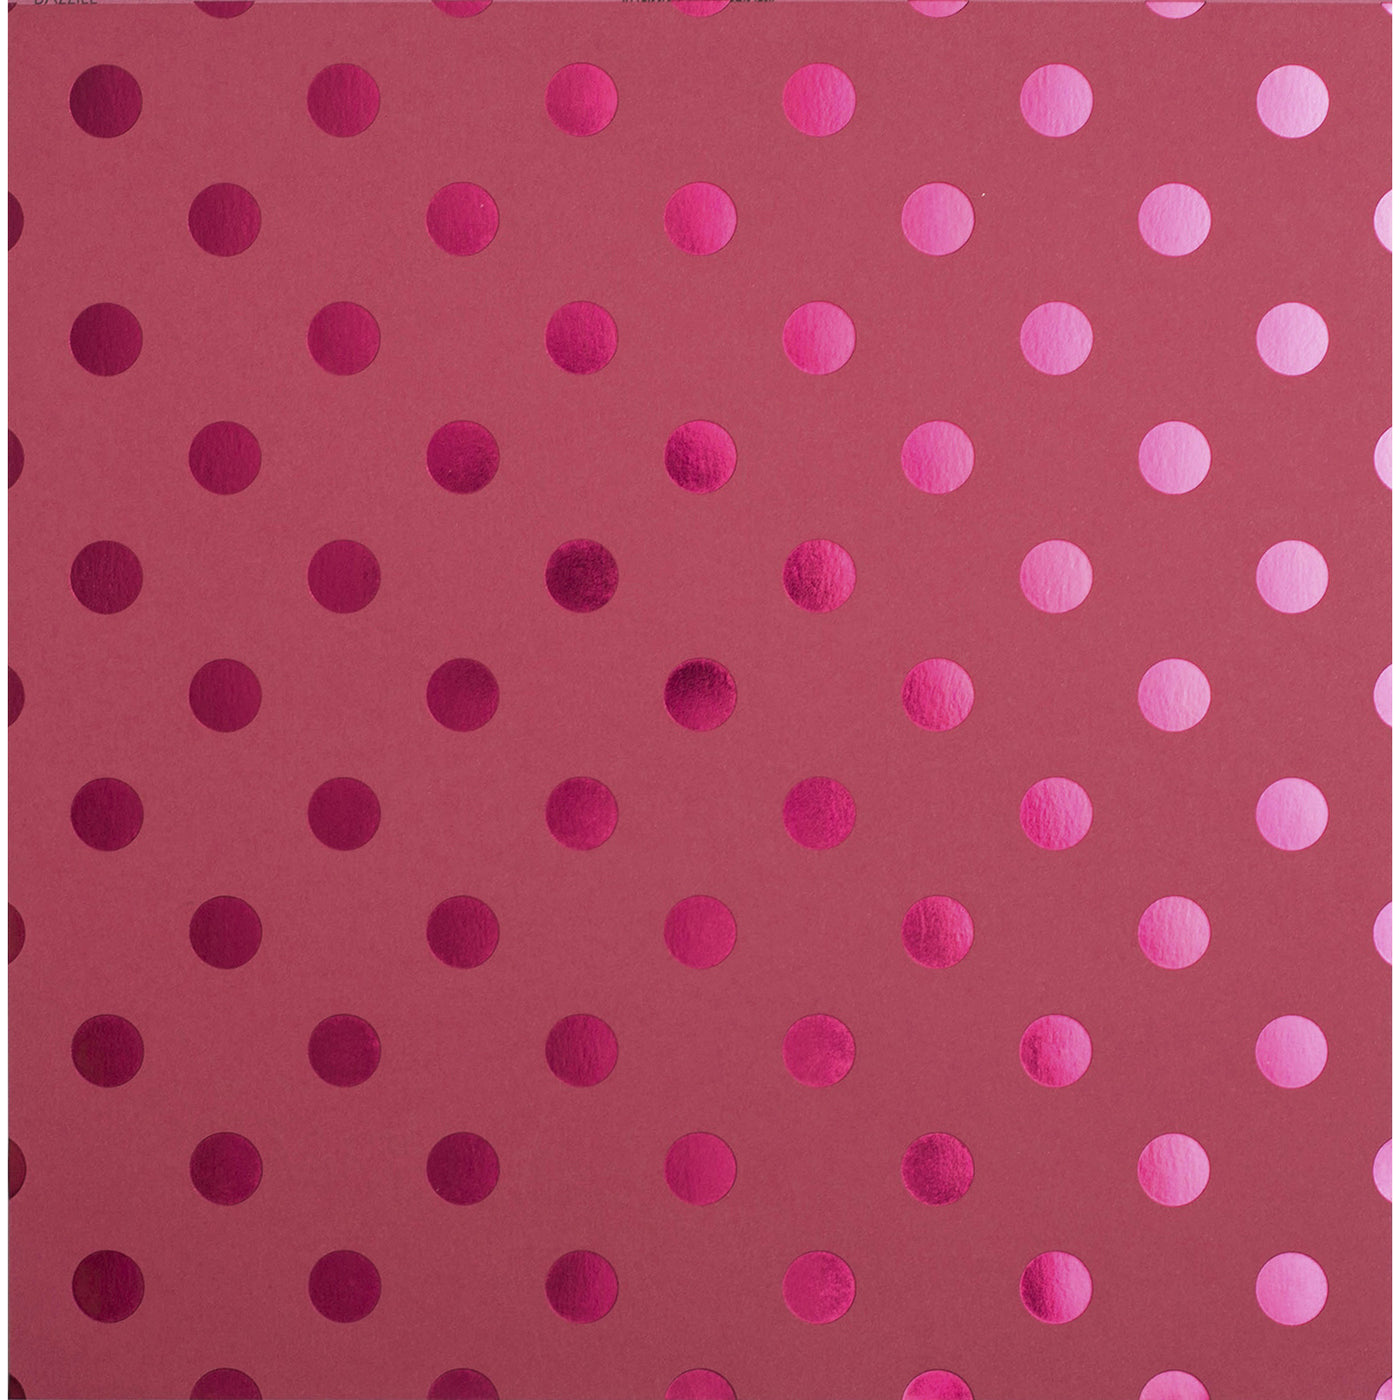 Taffy Foil Dots - 12x12 Specialty cardstock. Large foil pink dots on bright taffy pink colored cardstock. 